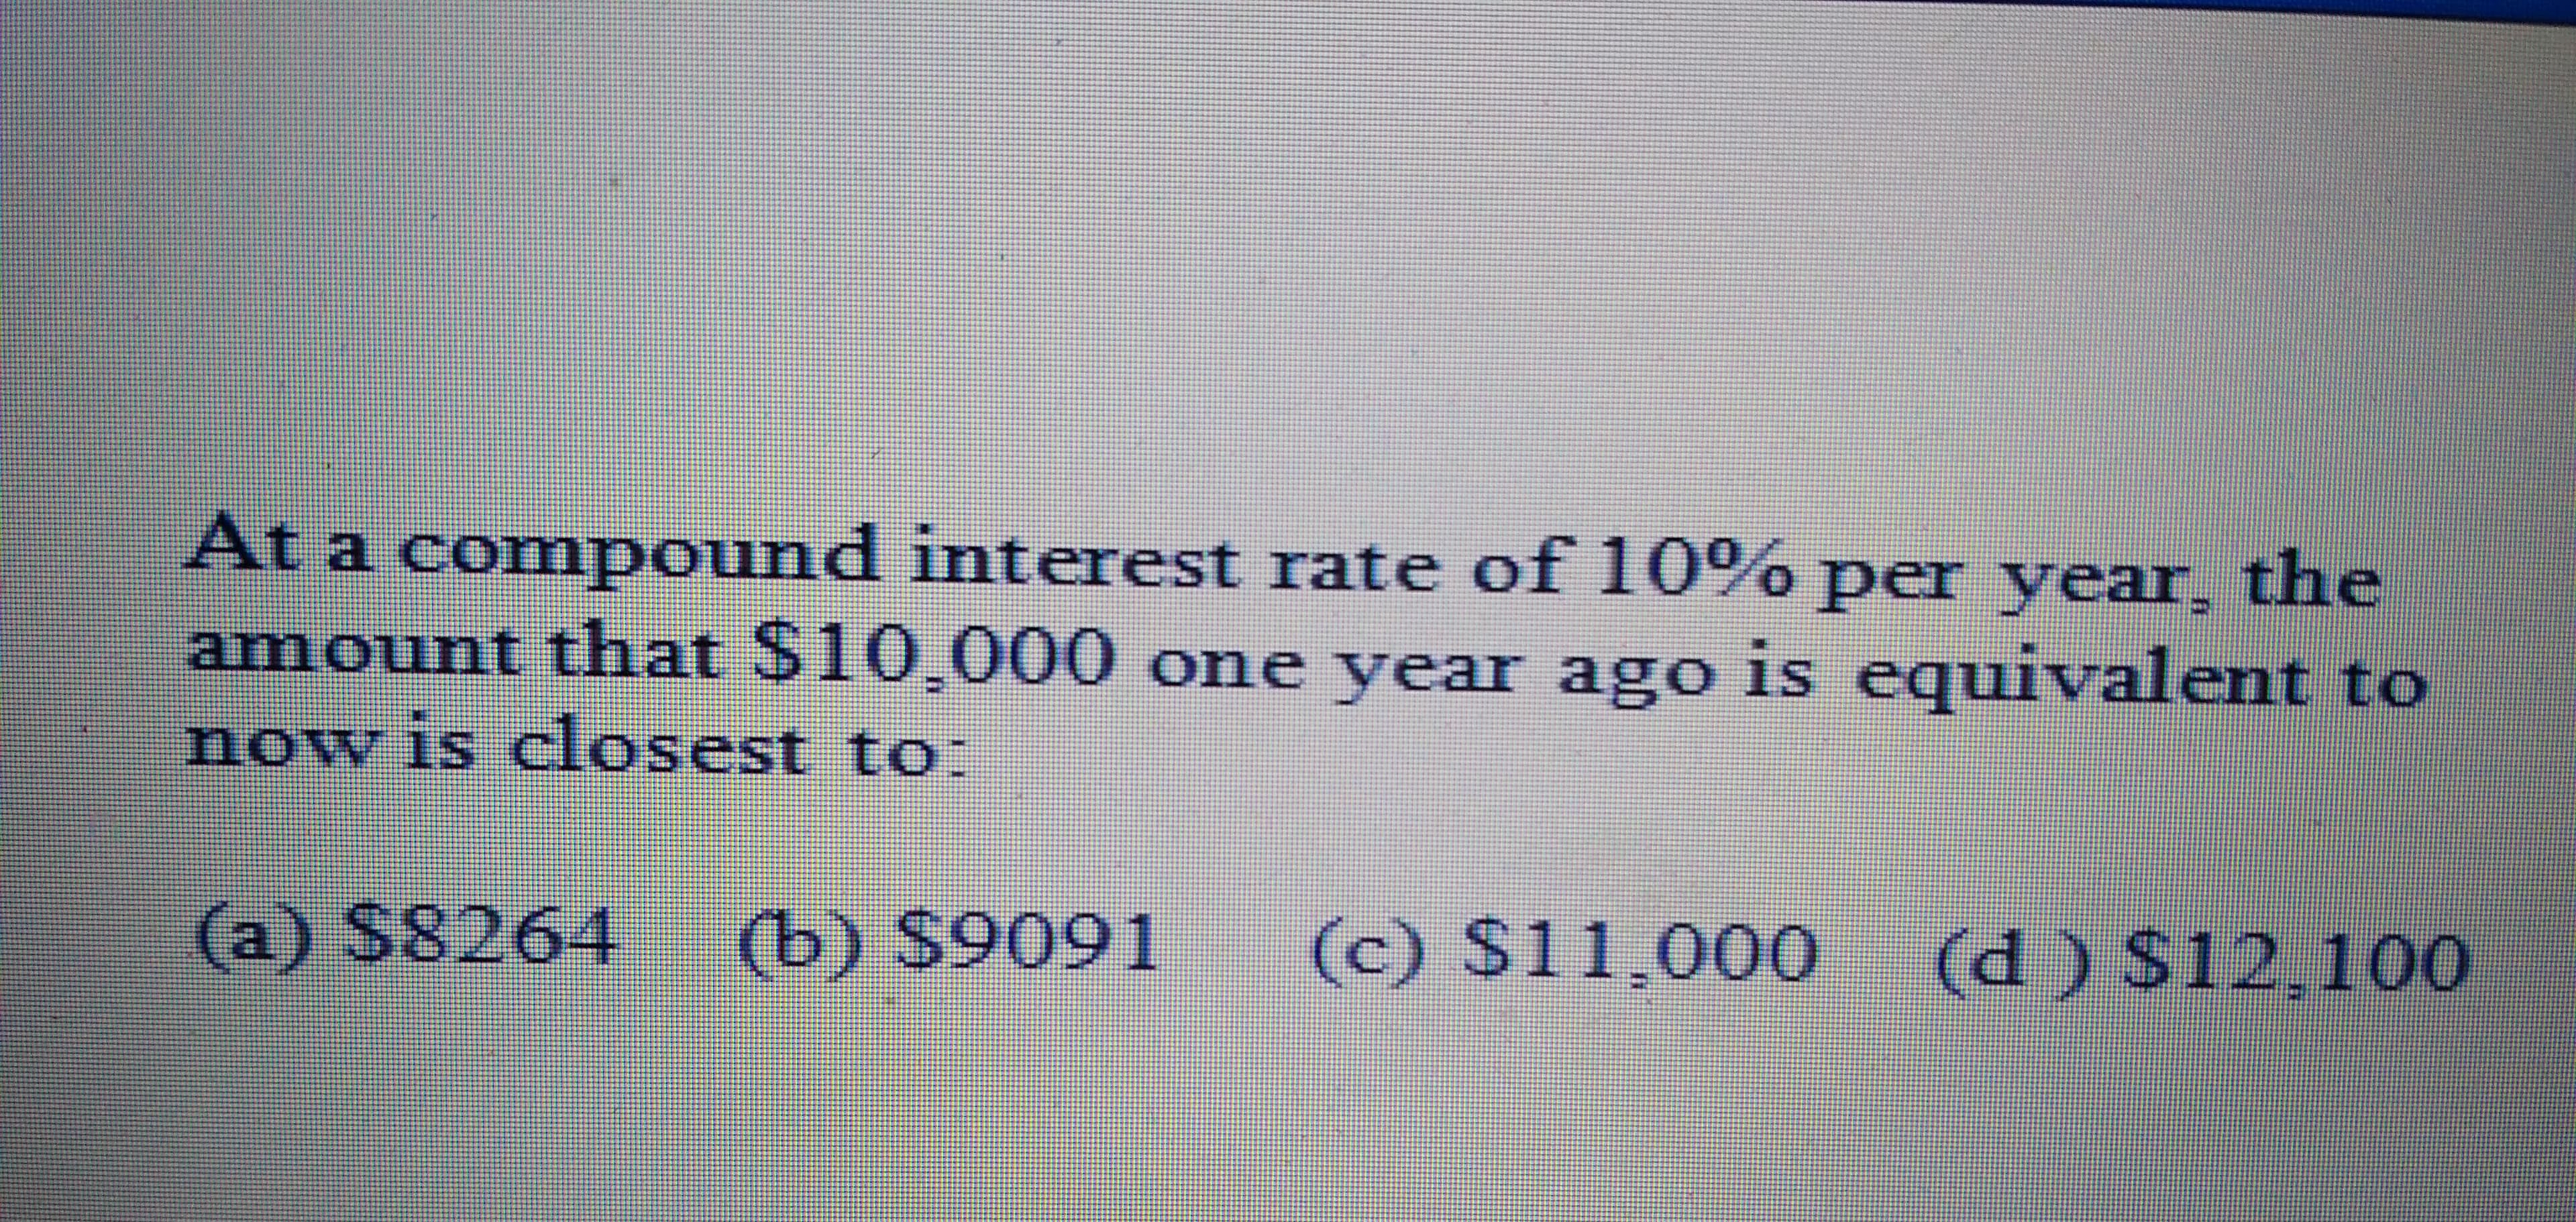 At a compound interest rate of 10%
amount that $10,000 one year ago is equivalent to
per year the
